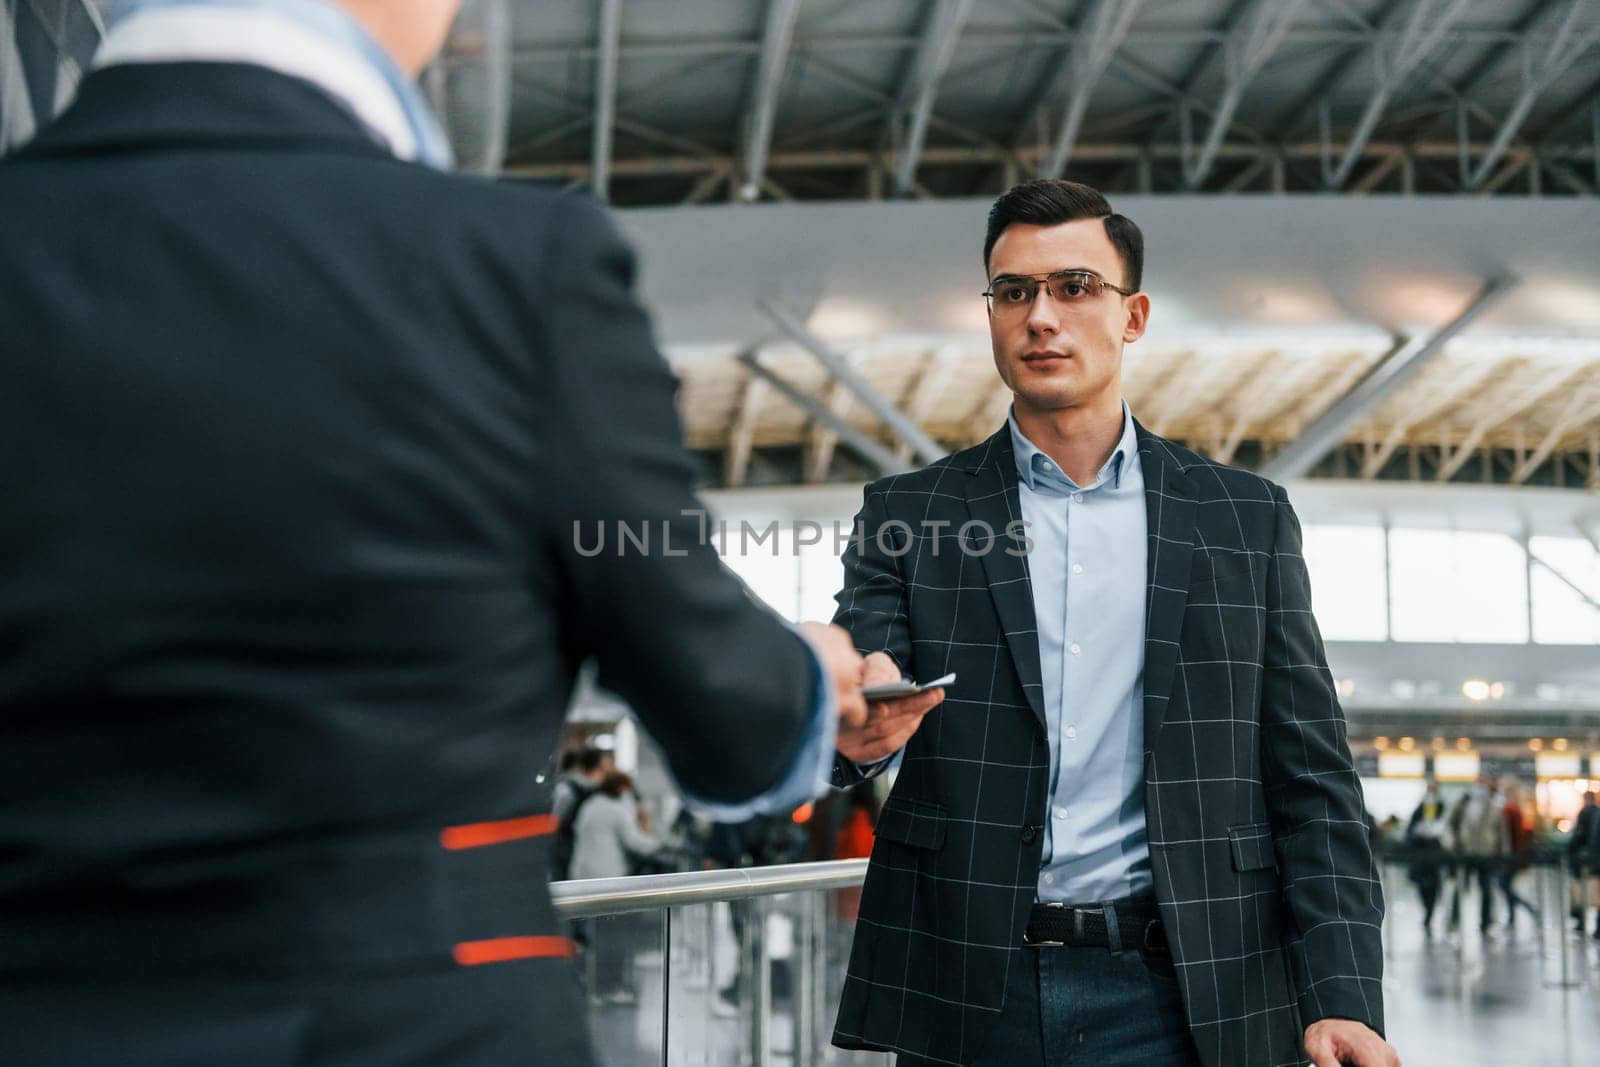 Giving the documents. Young businessman in formal clothes is in the airport at daytime.